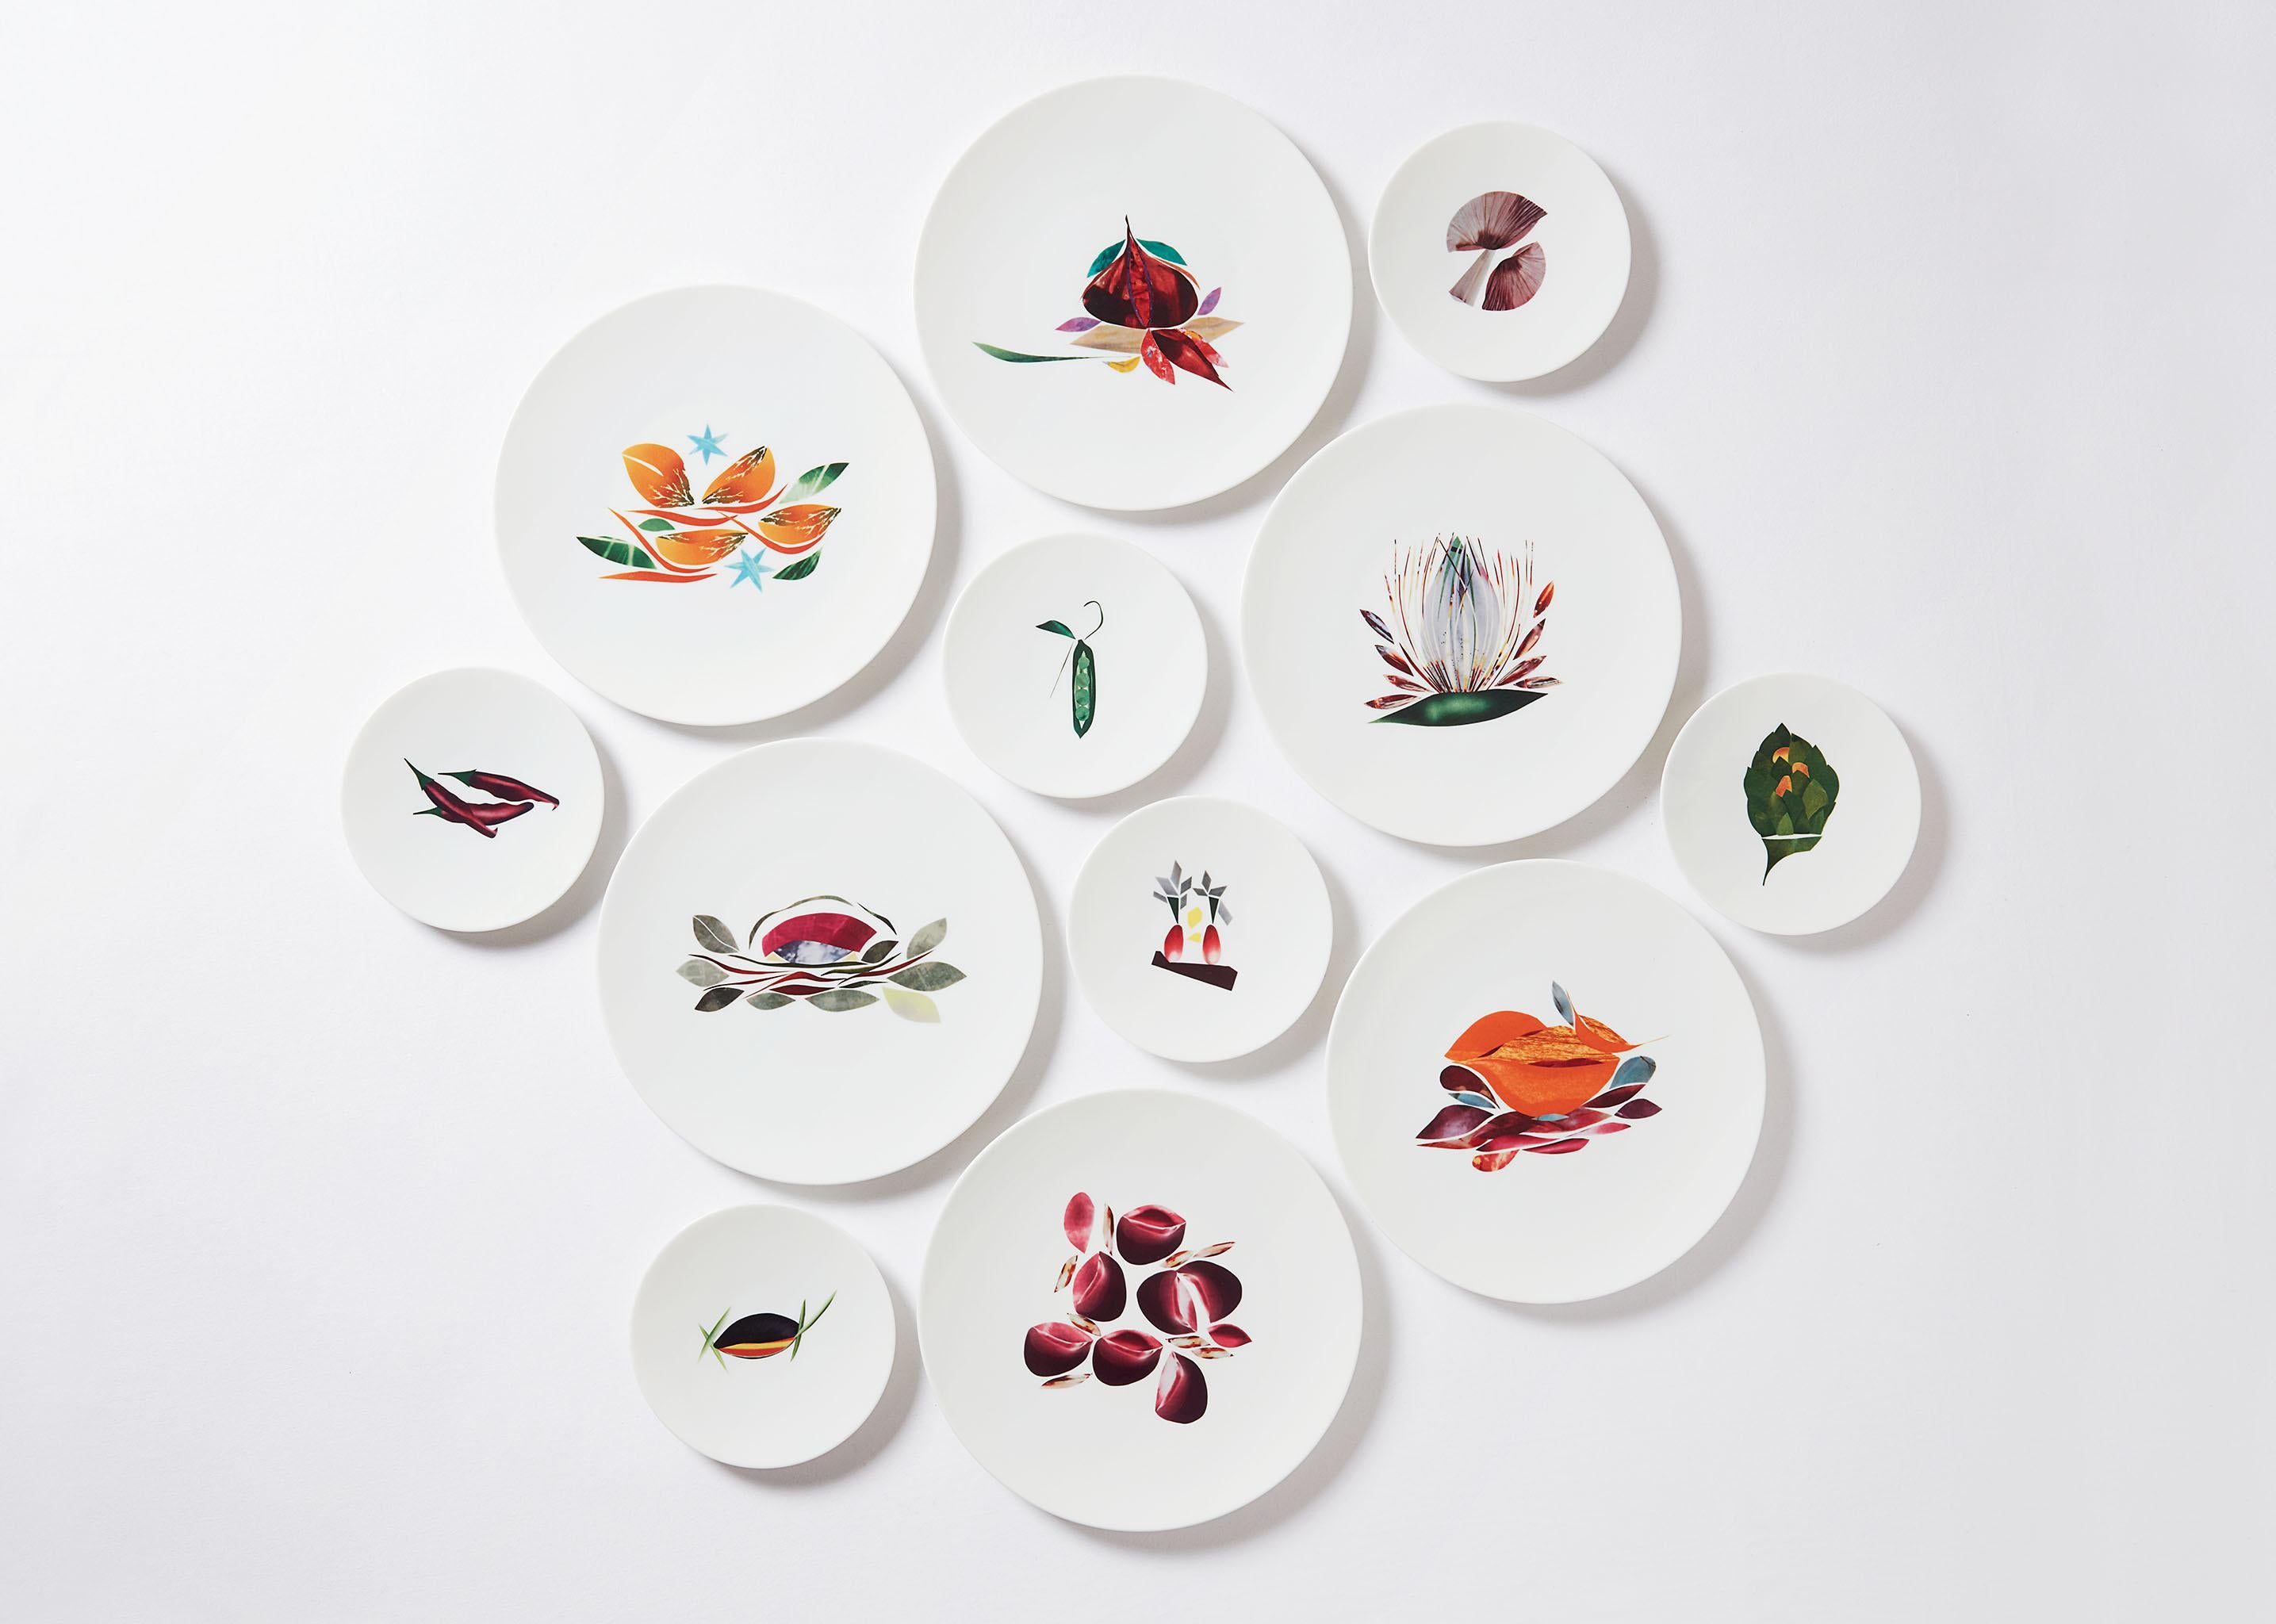 Contemporary Bread Porcelain Plate By The Chef Alain Passard Model 